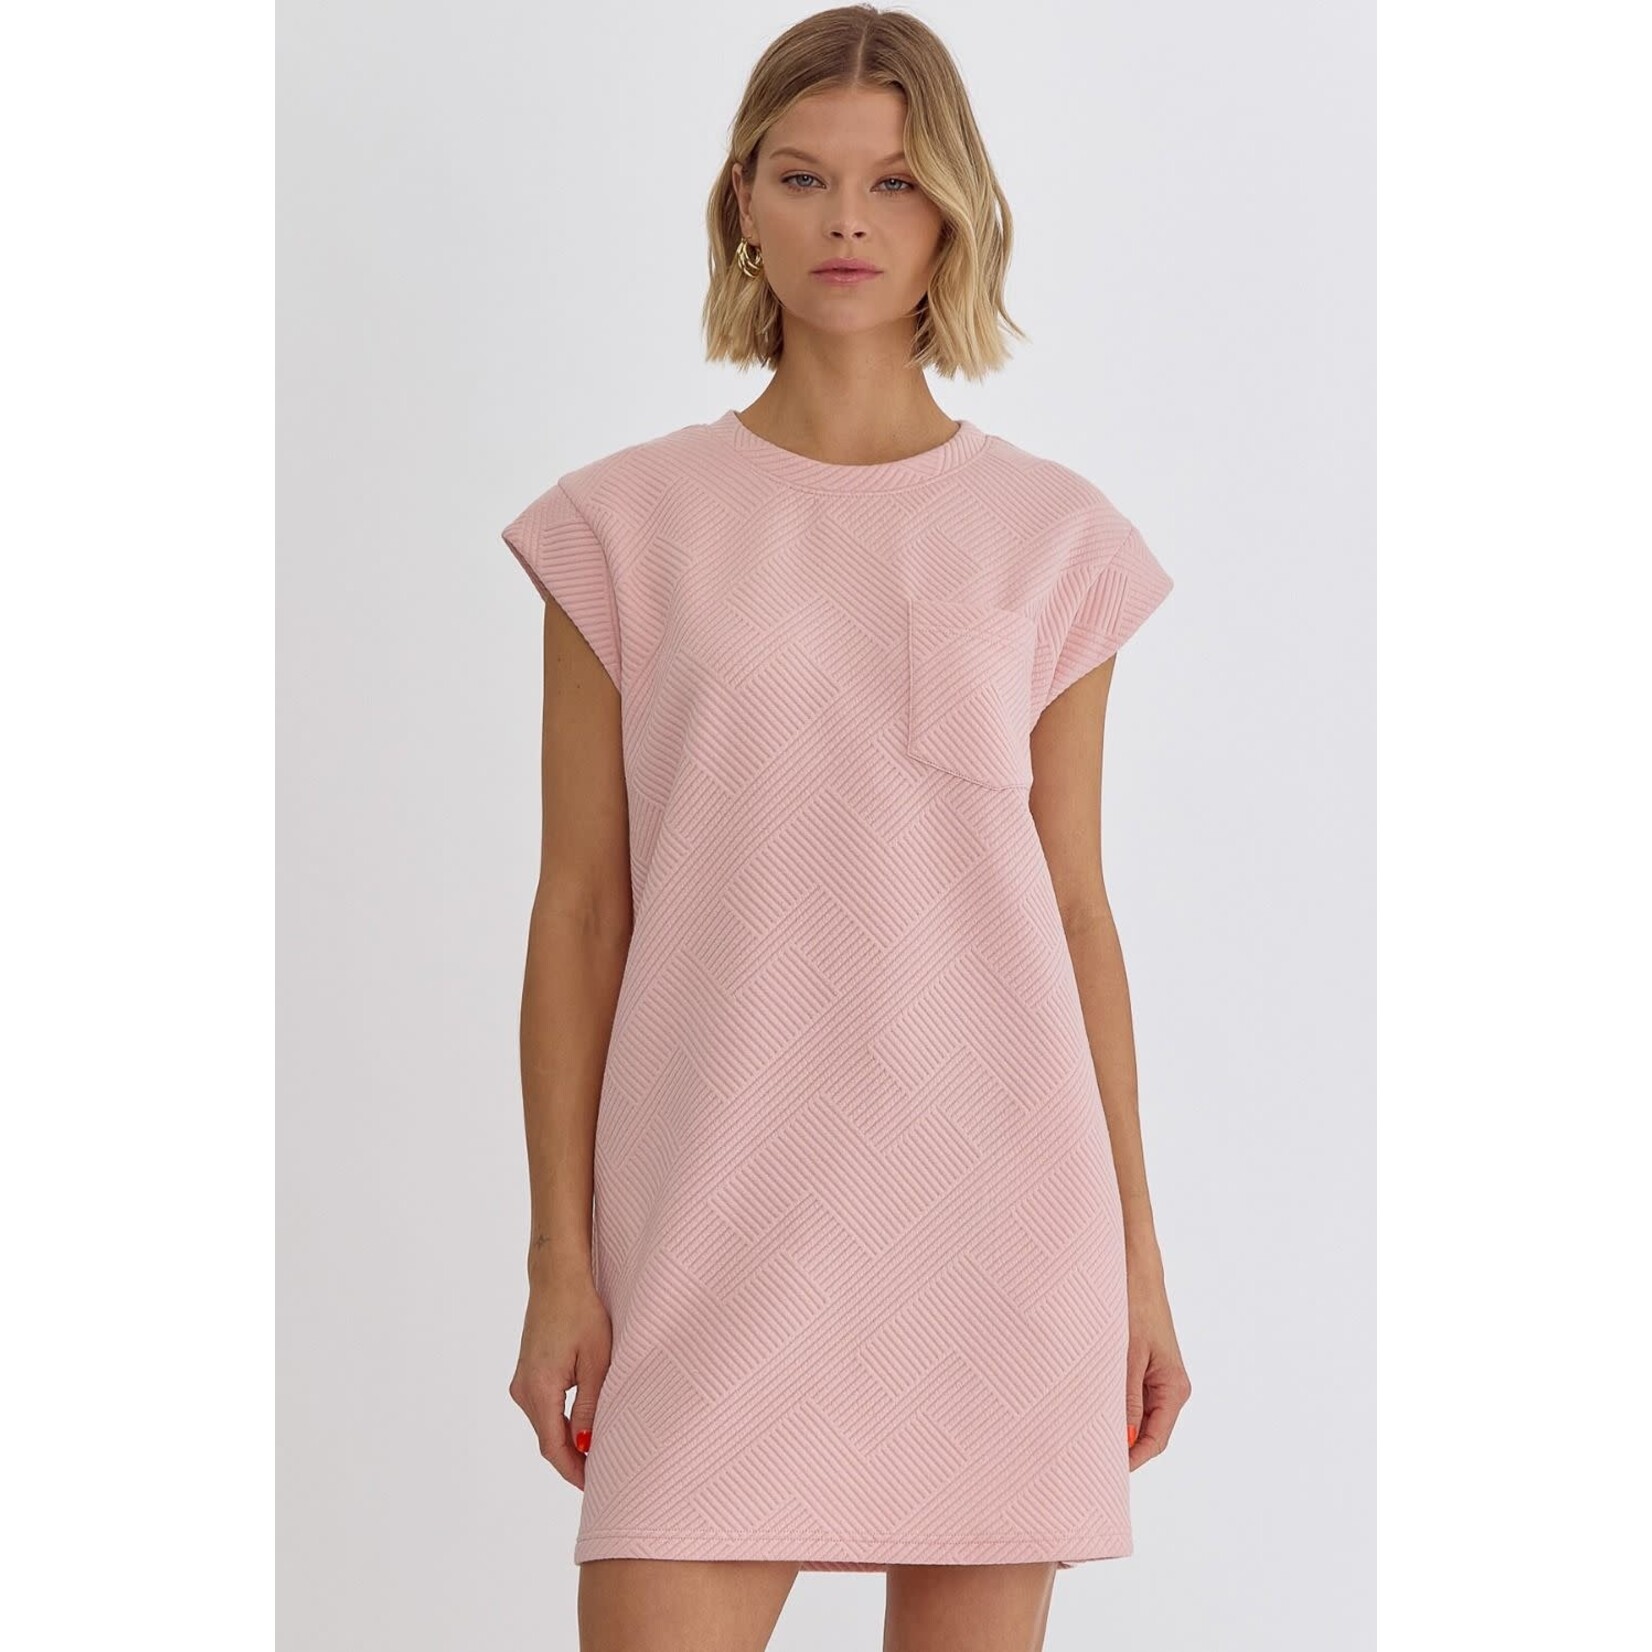 The Kelly Dress in Light Pink